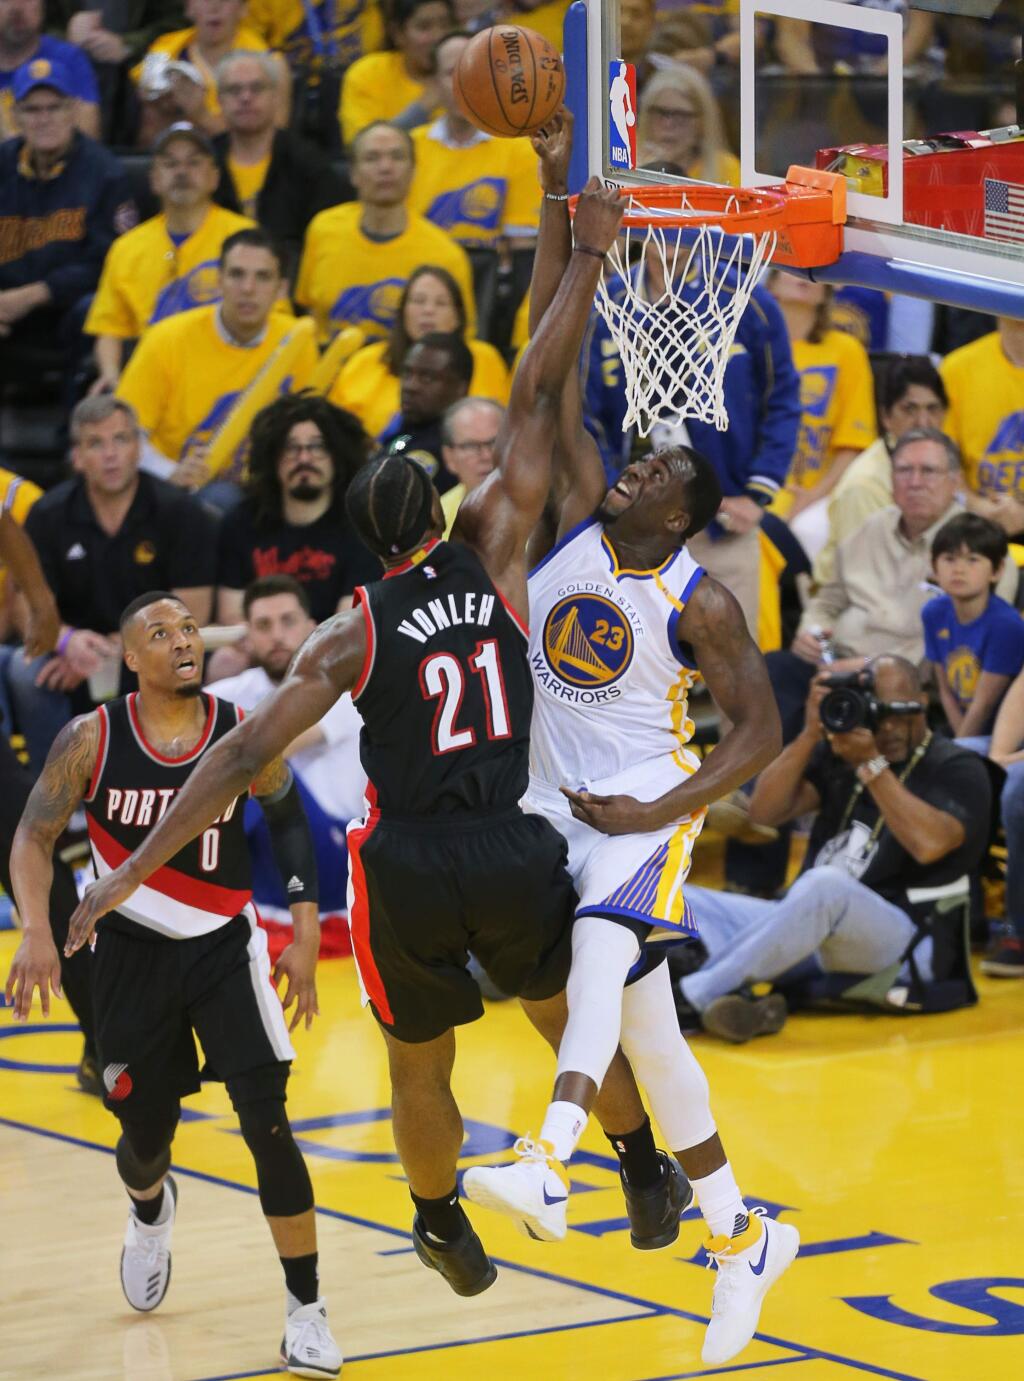 Golden State Warriors forward Draymond Green blocks a shot attempt by Portland Trail Blazers forward Noah Vonleh during Game 1 of the first round of the NBA playoffs in Oakland on Sunday, April 16, 2017. The Warriors defeated the Trail Blazers 121-109. (Christopher Chung / The Press Democrat)